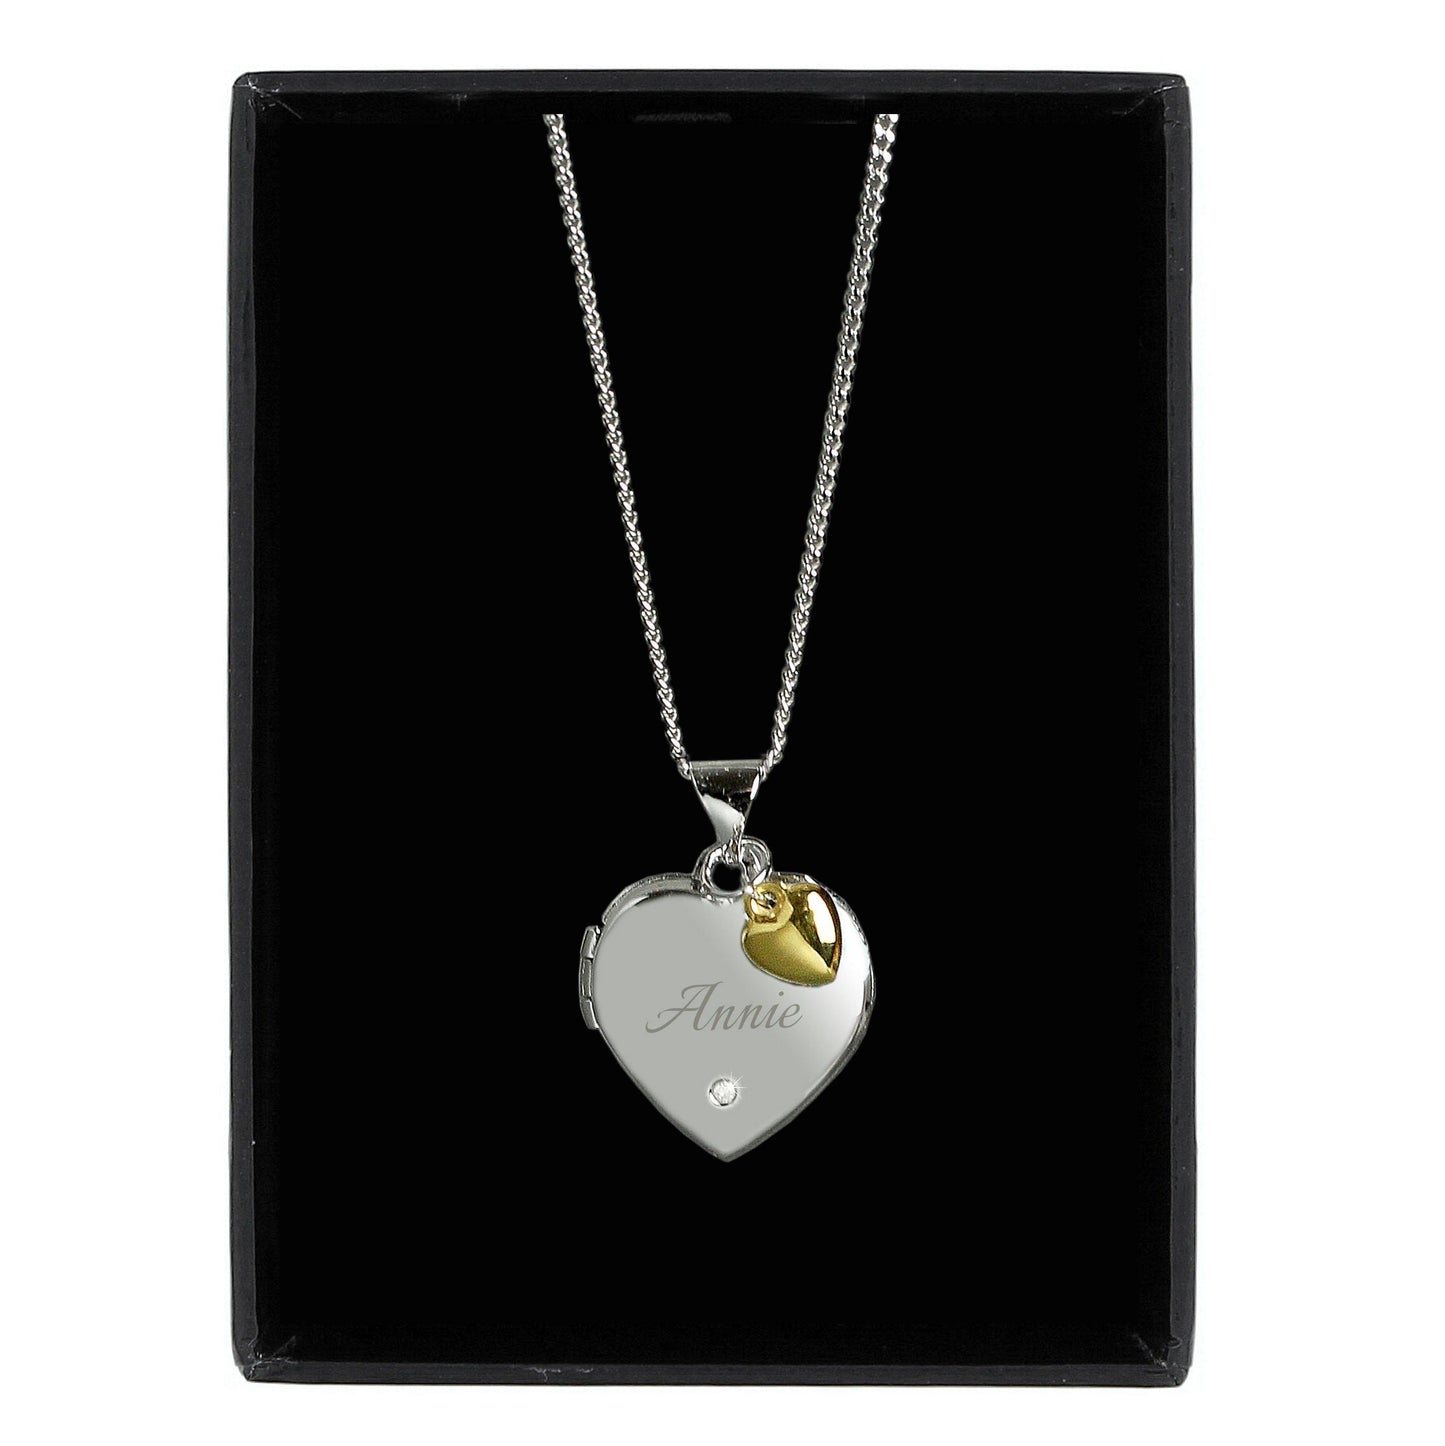 Personalised Sterling Silver Heart Locket Necklace with Diamond and 9ct Gold Charm - Kporium Home & Garden